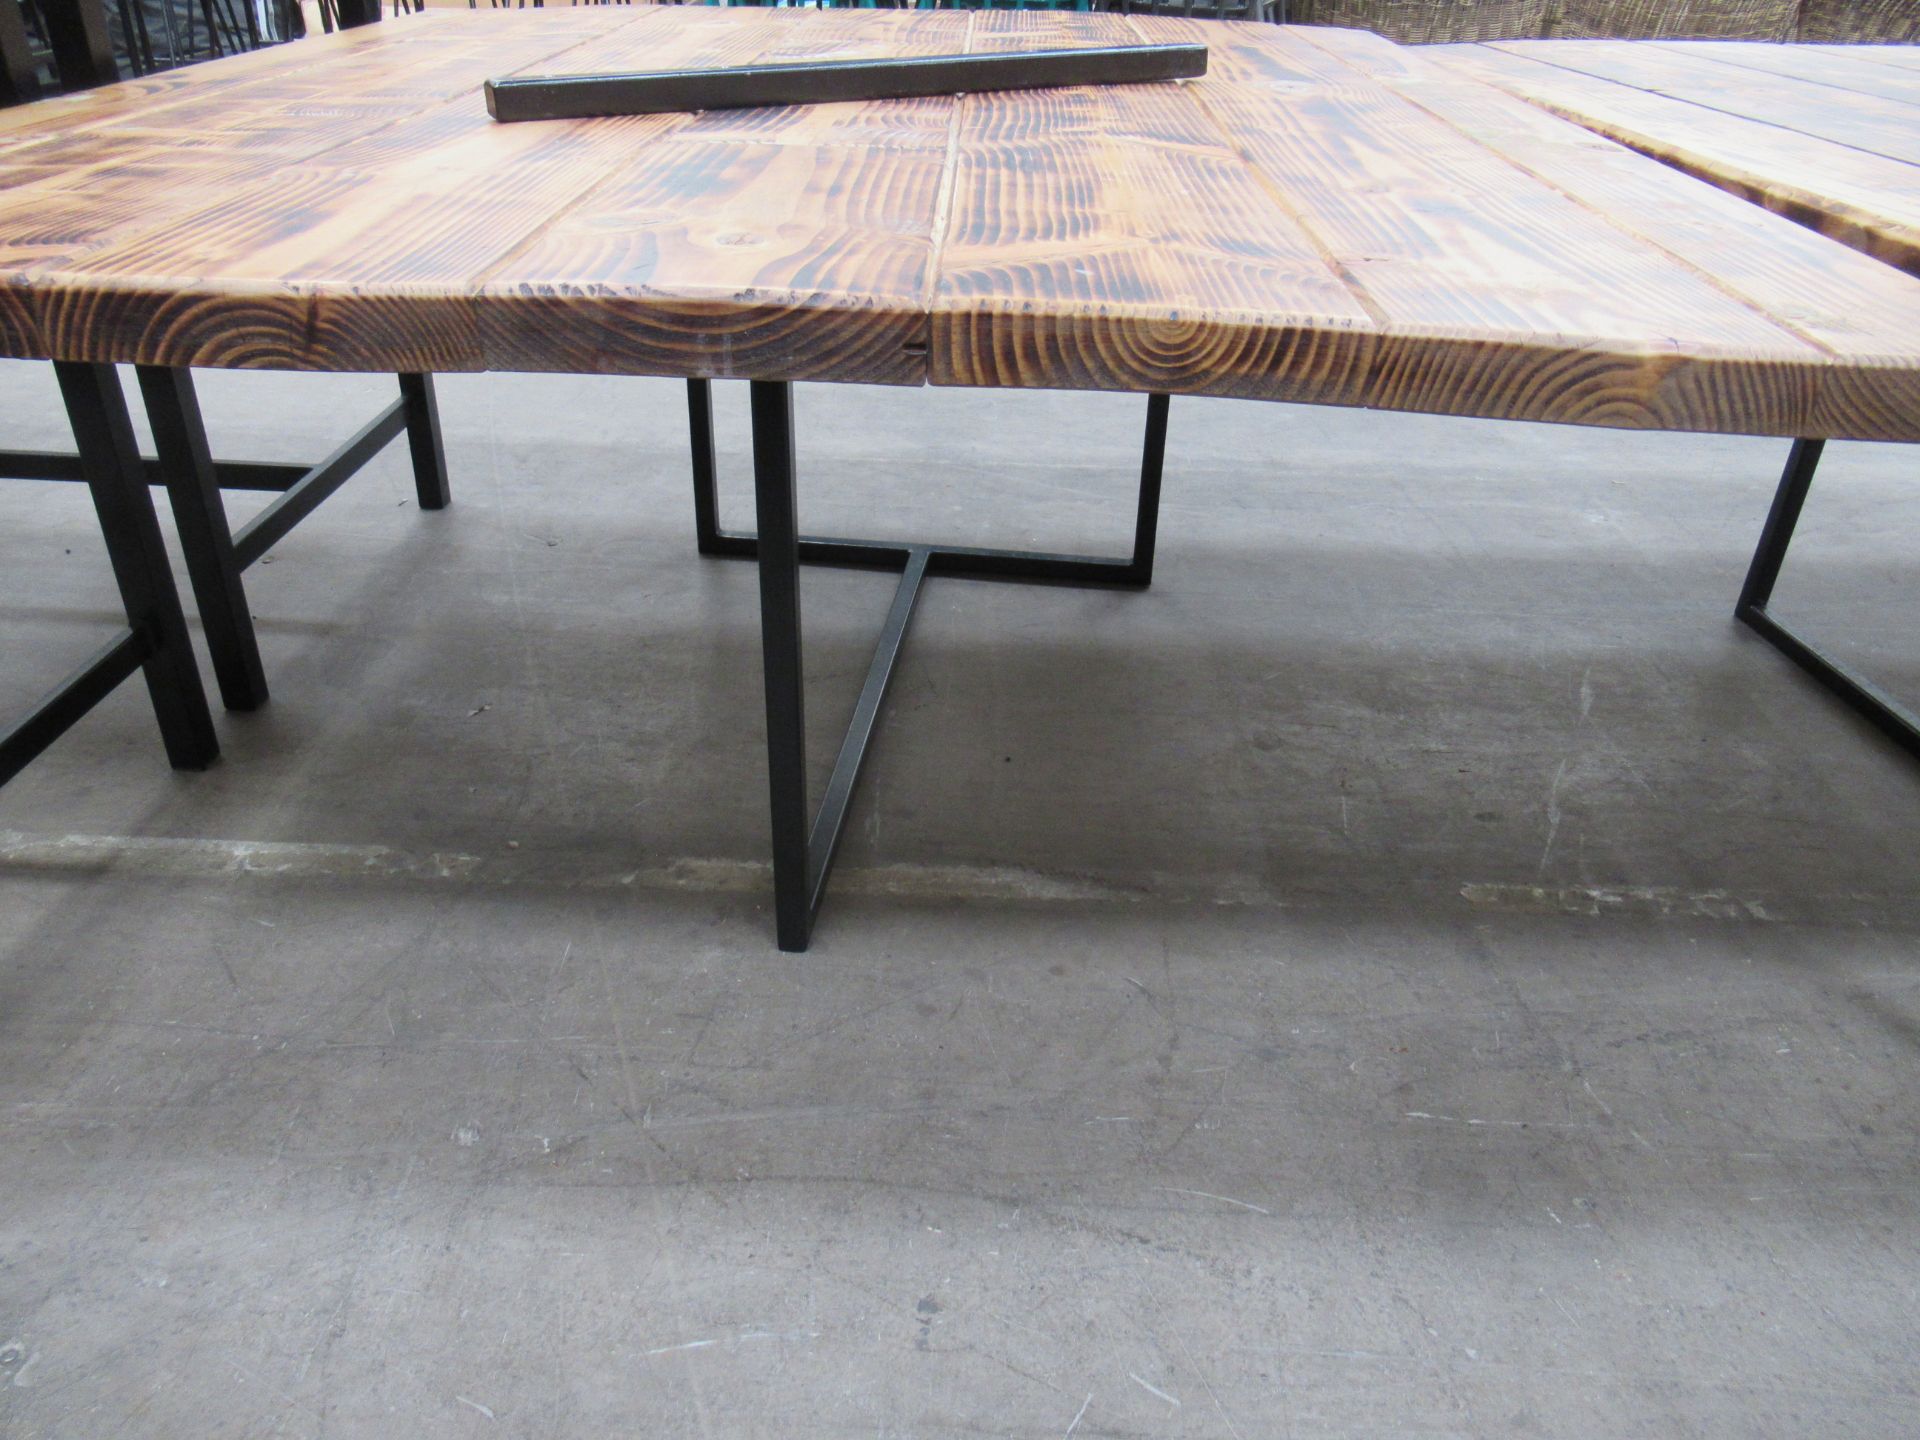 Large Rustic Effect Table (2x Parts) (3200/1600 x 1370mm) - Image 5 of 5